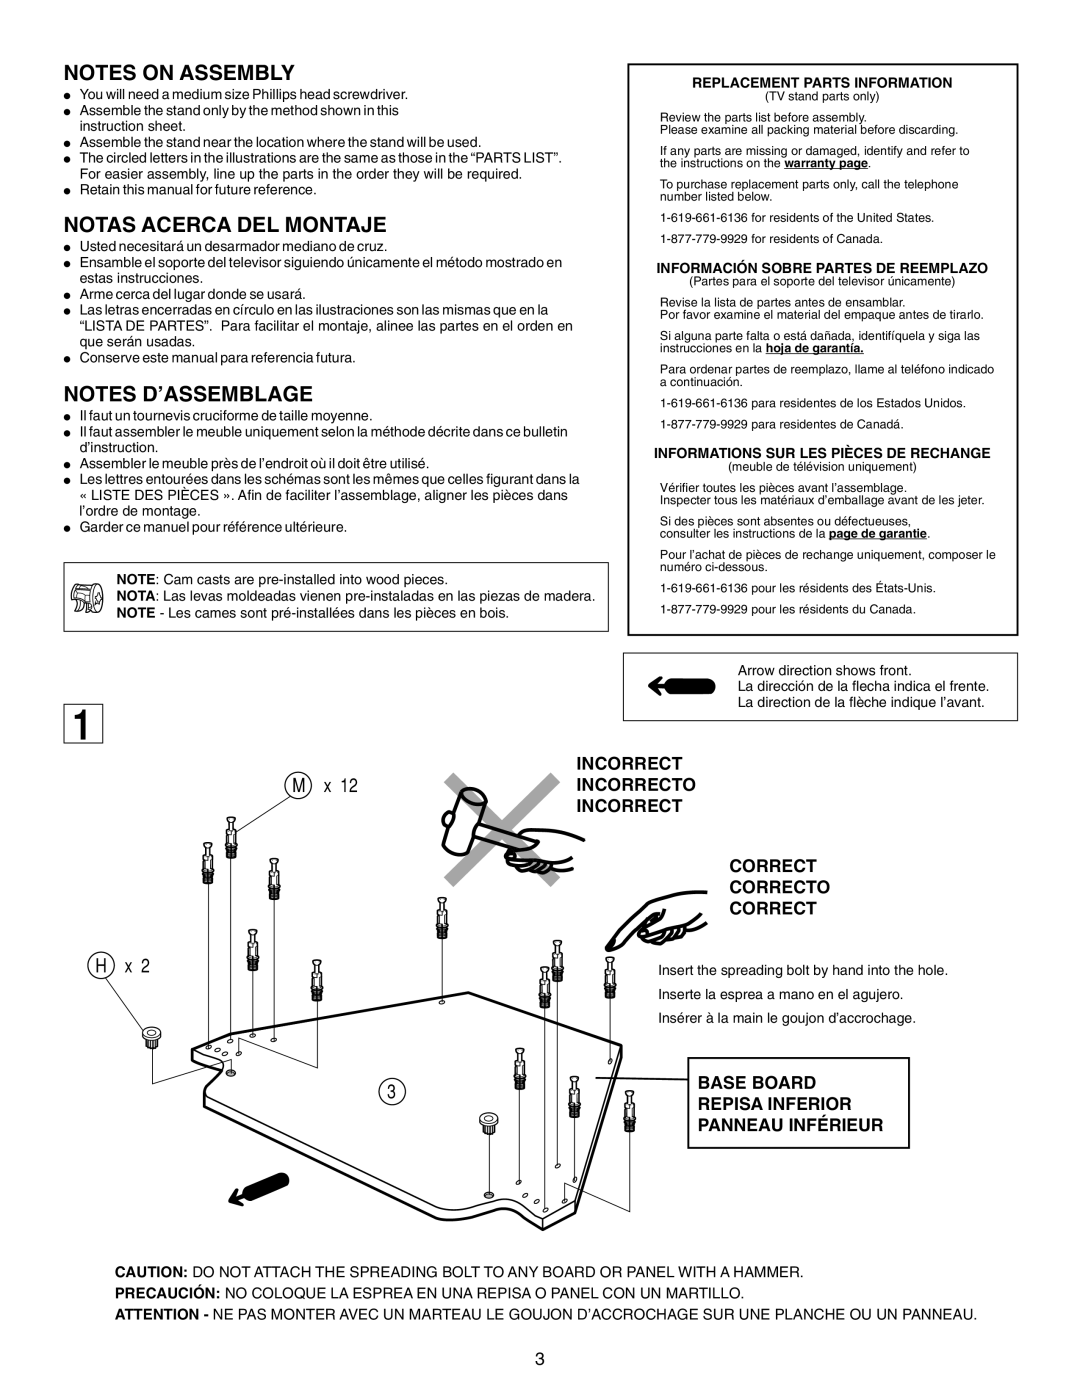 Sony SU-36FS2 manual Notes On Assembly, Notas Acerca Del Montaje, Notes D’Assemblage, H, Replacement Parts Information 